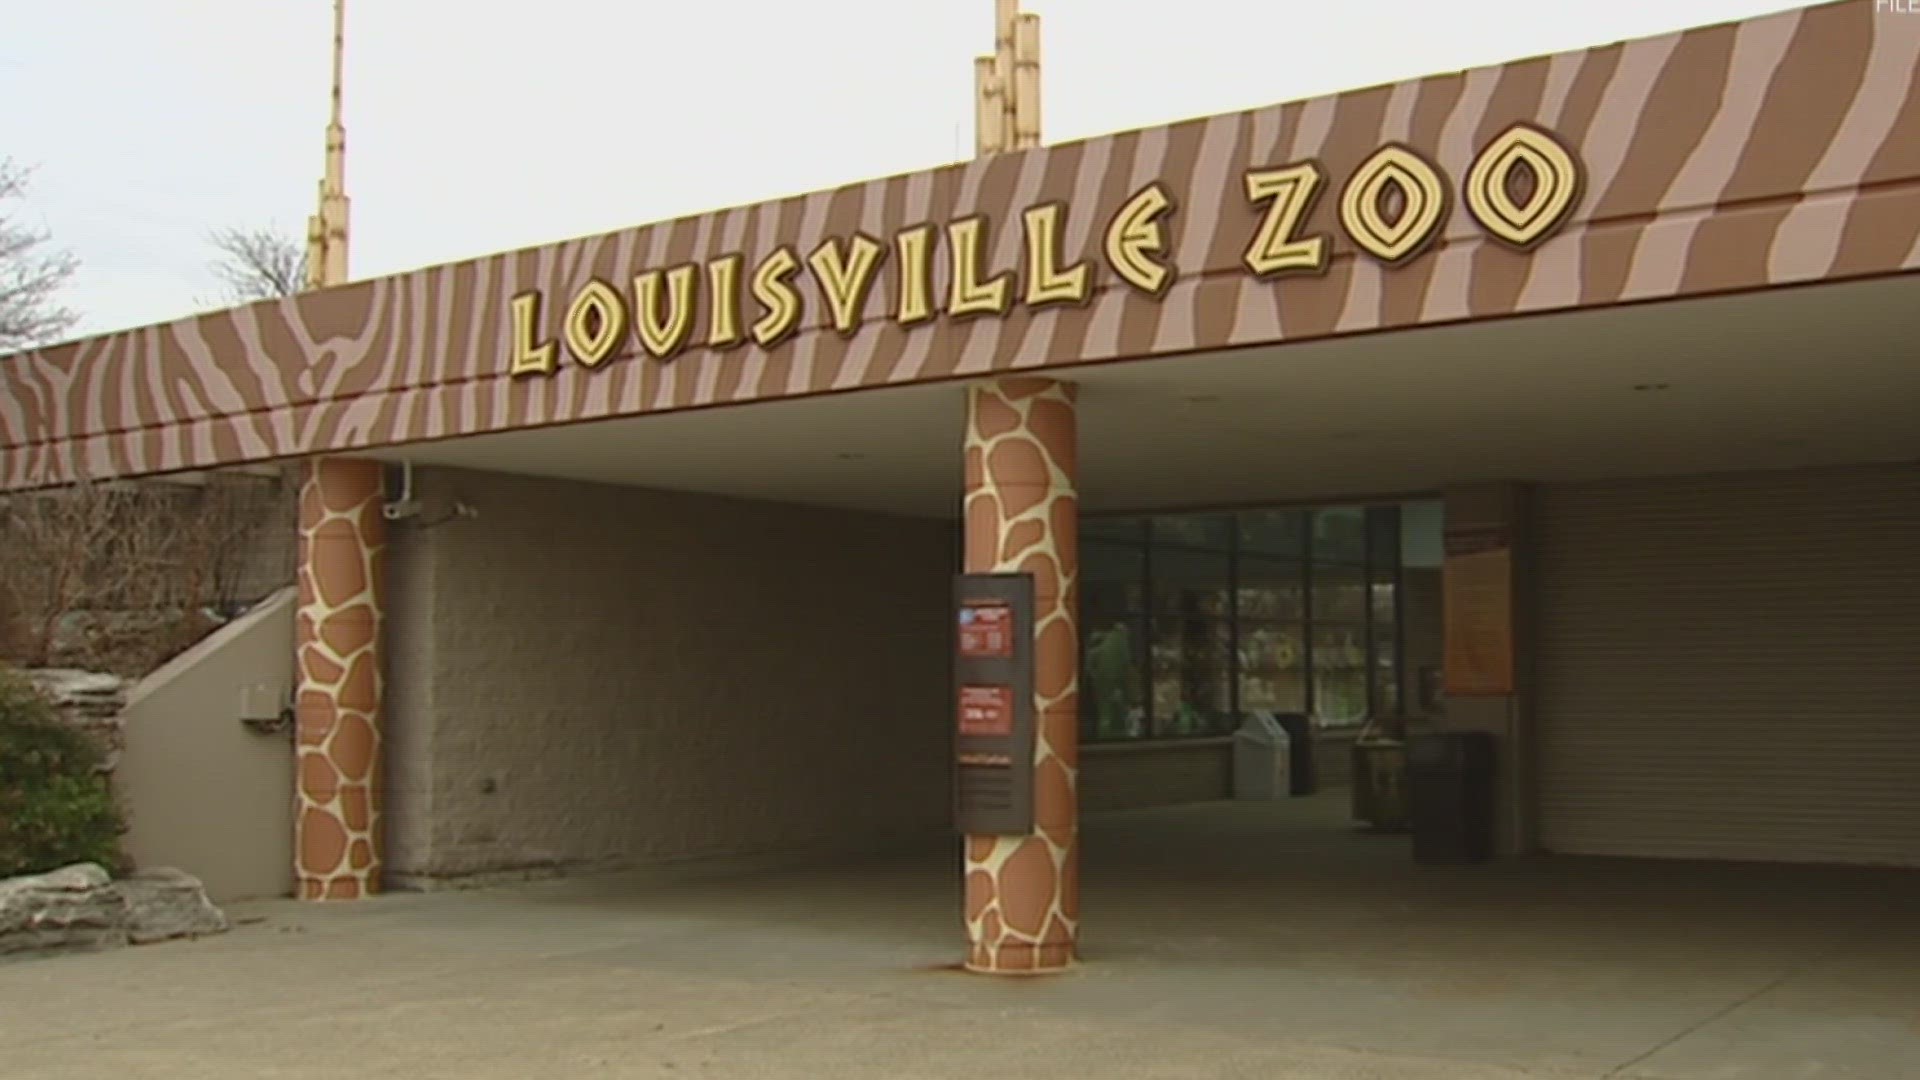 At least one Kentucky school district had to cancel field trips due to the police activity at the Louisville Zoo on Friday.